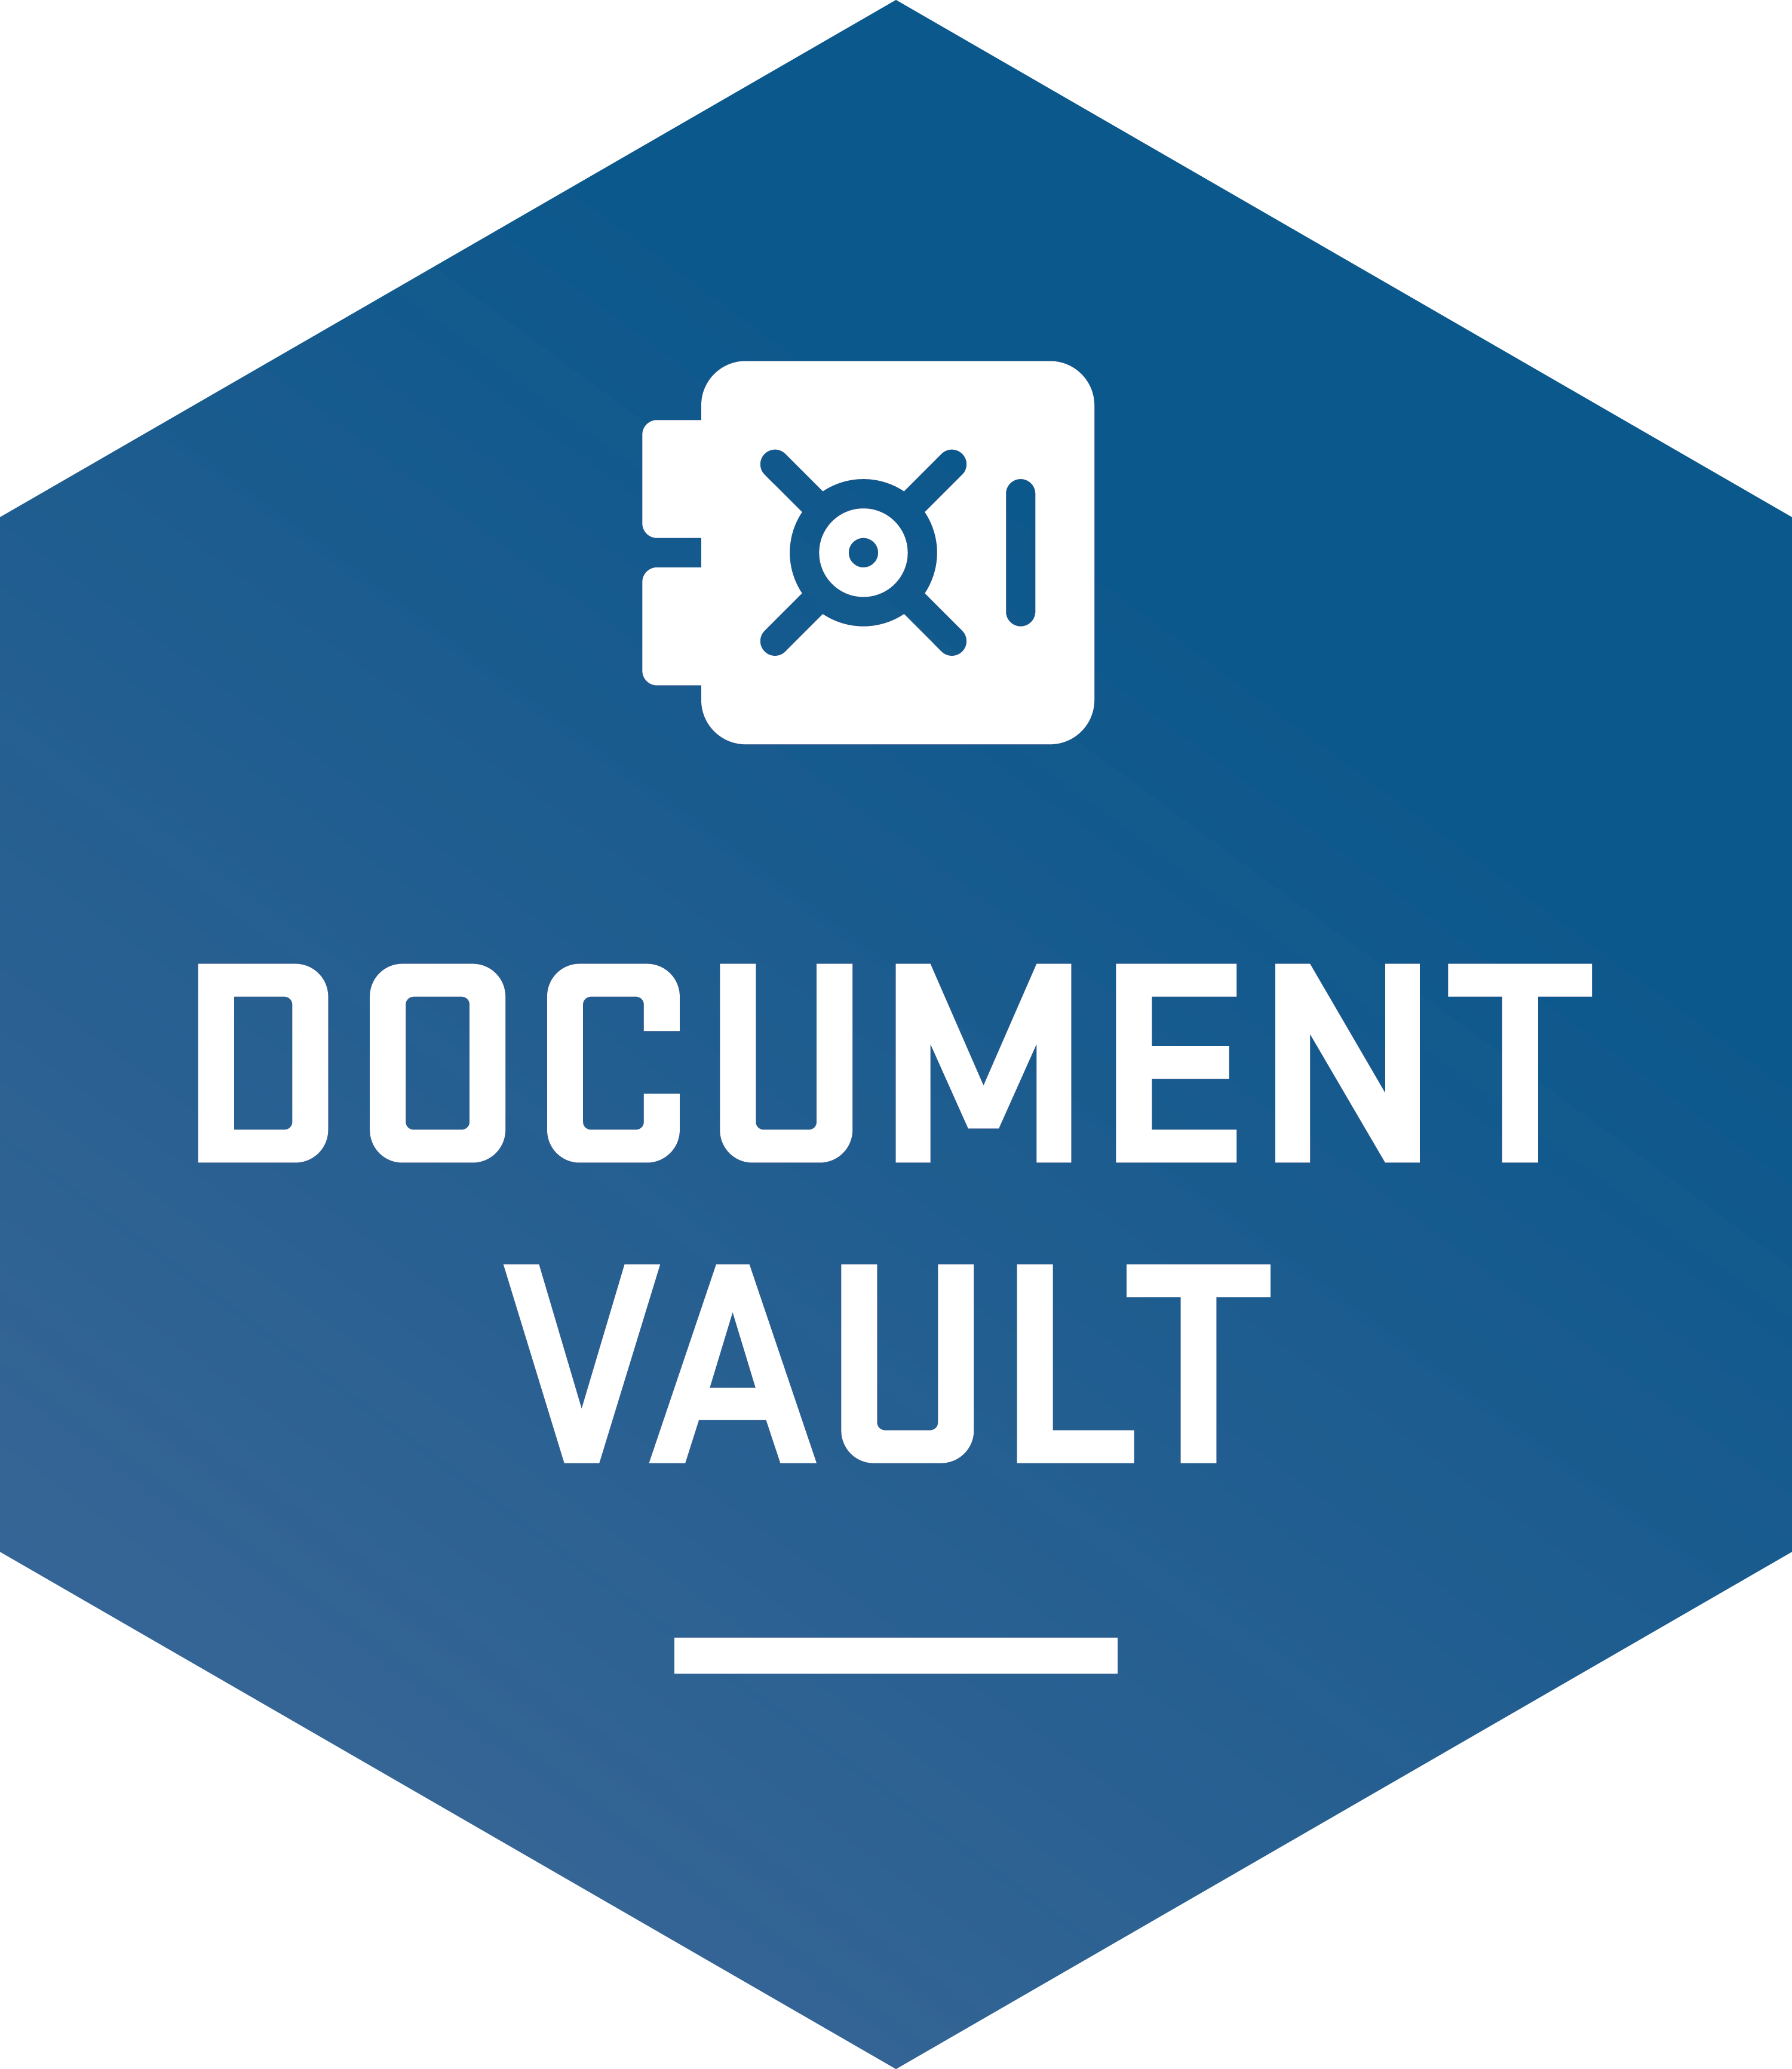 Document Vault from superVision by Explore Information Services, a Solera Company